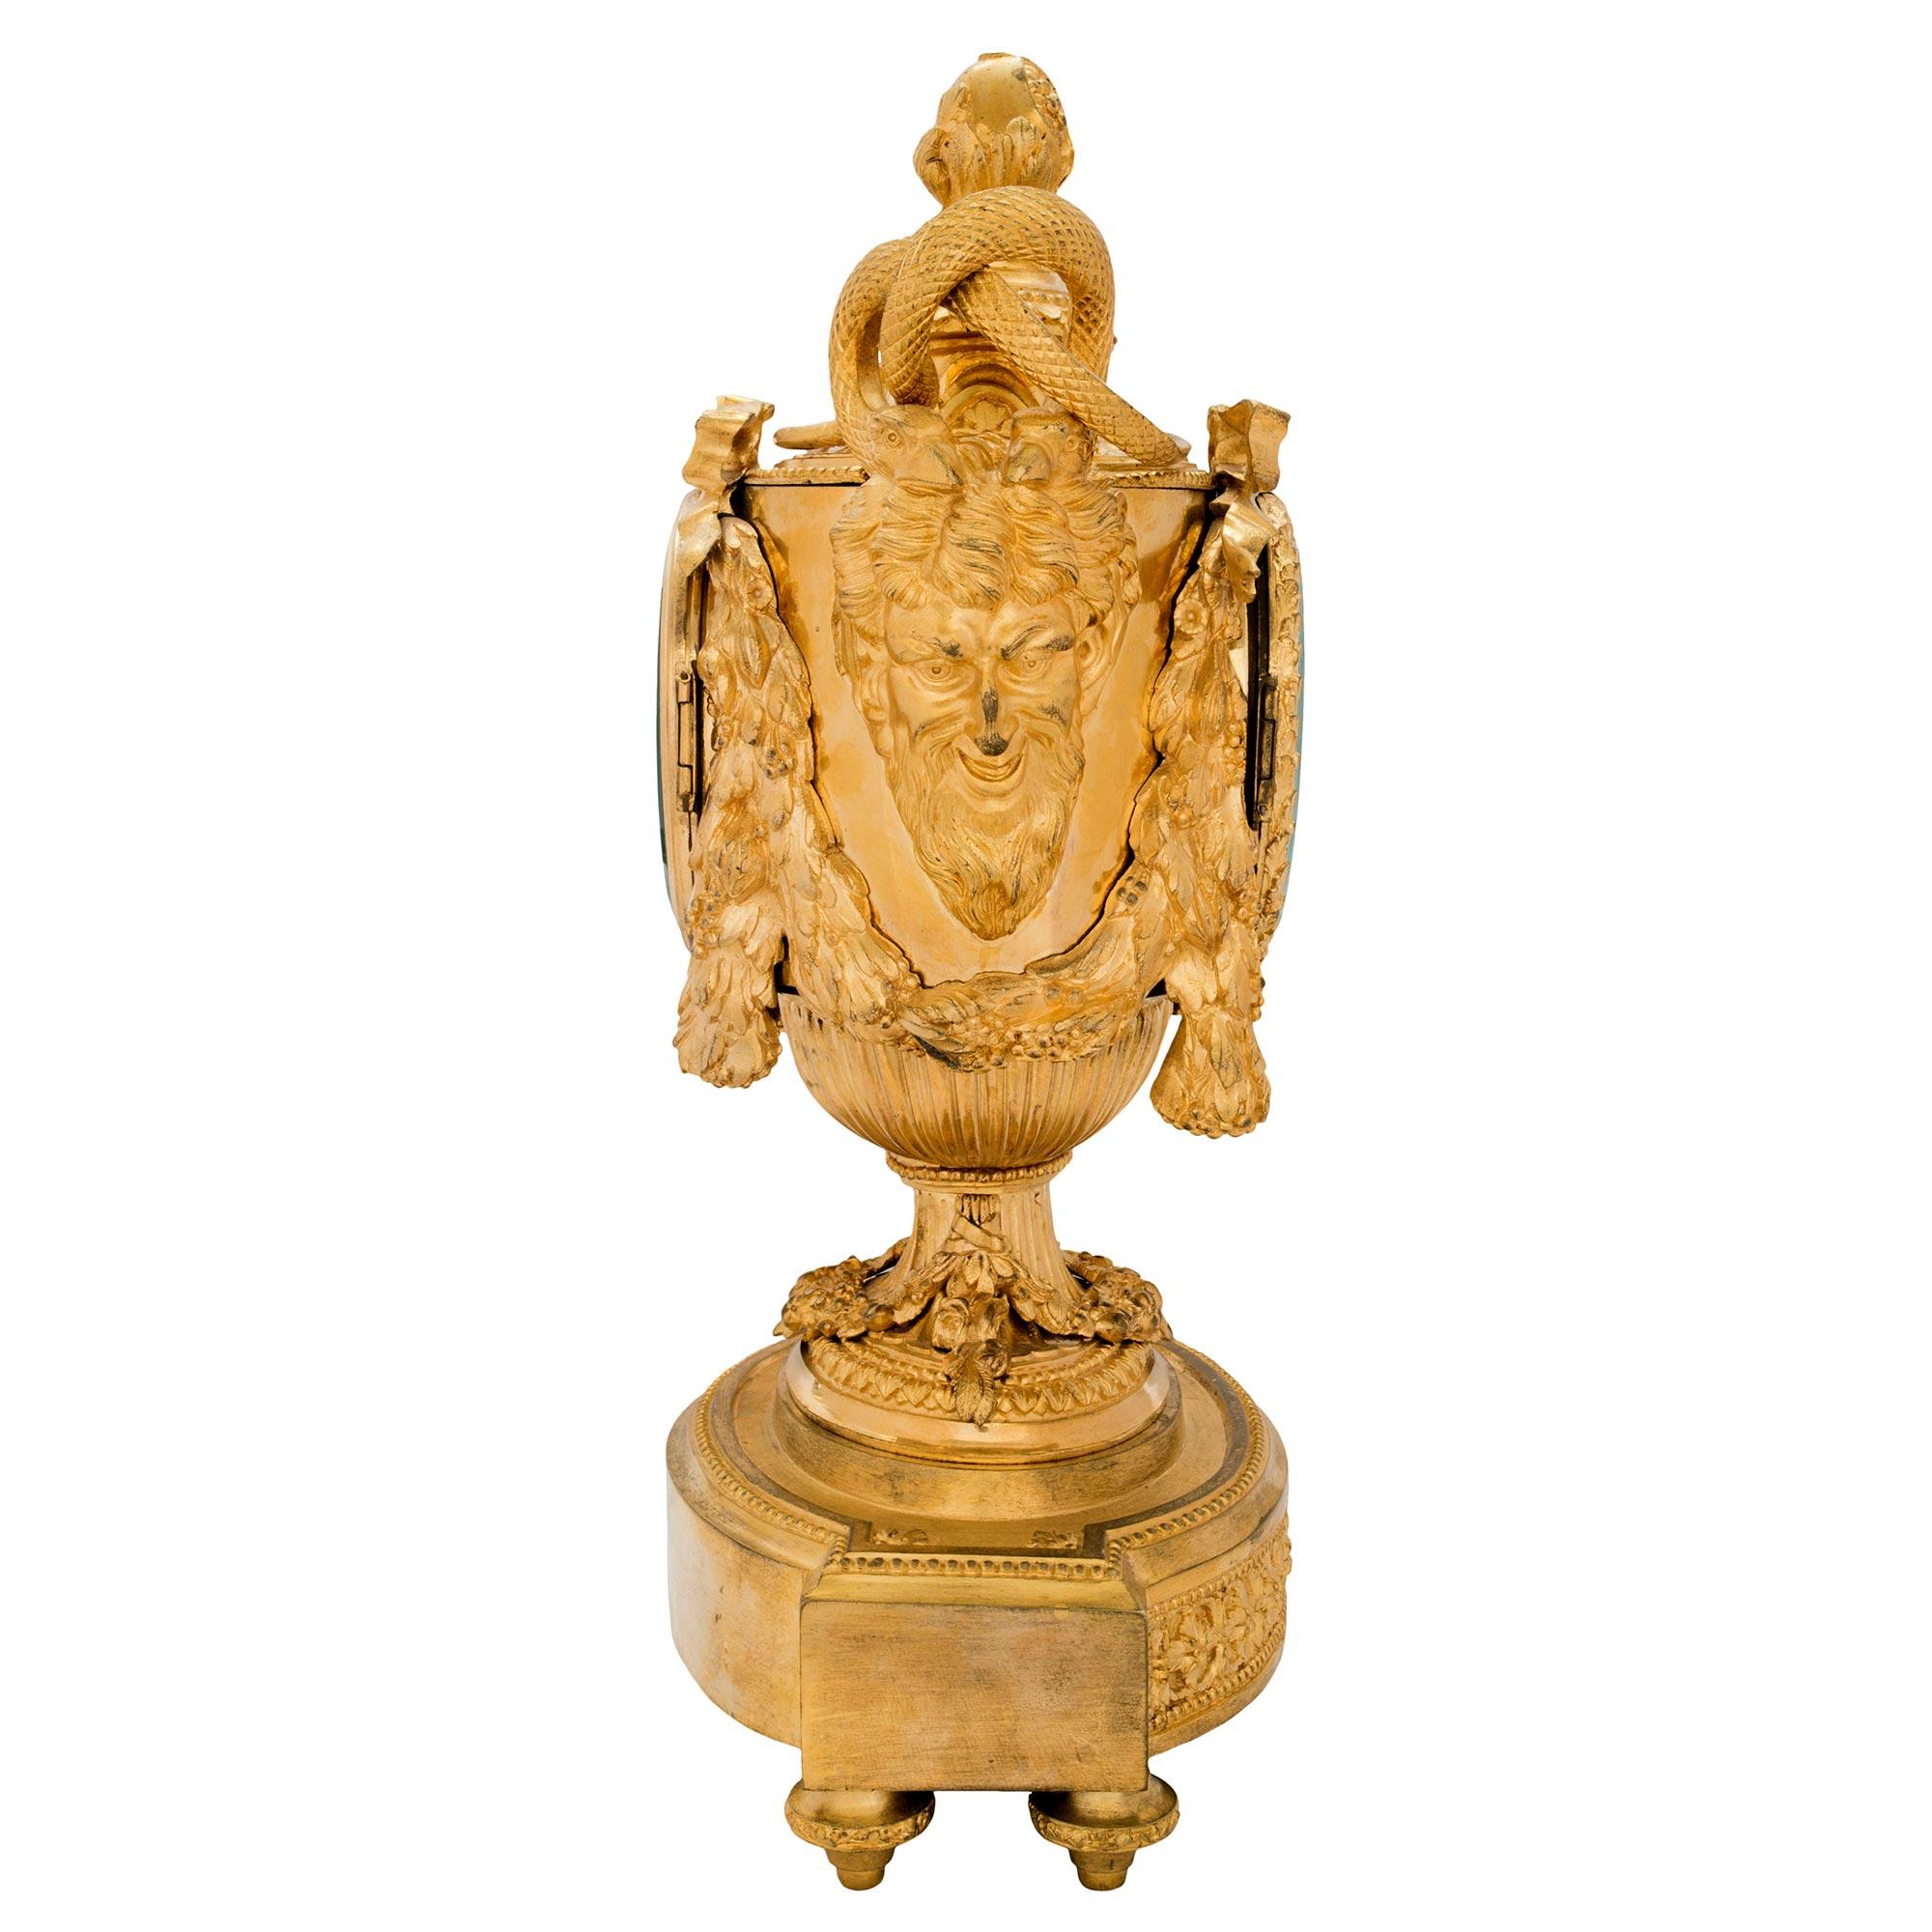 French Early 19th Century Louis XVI Style Ormolu Clock, 'Signed Lepaute Paris' For Sale 1